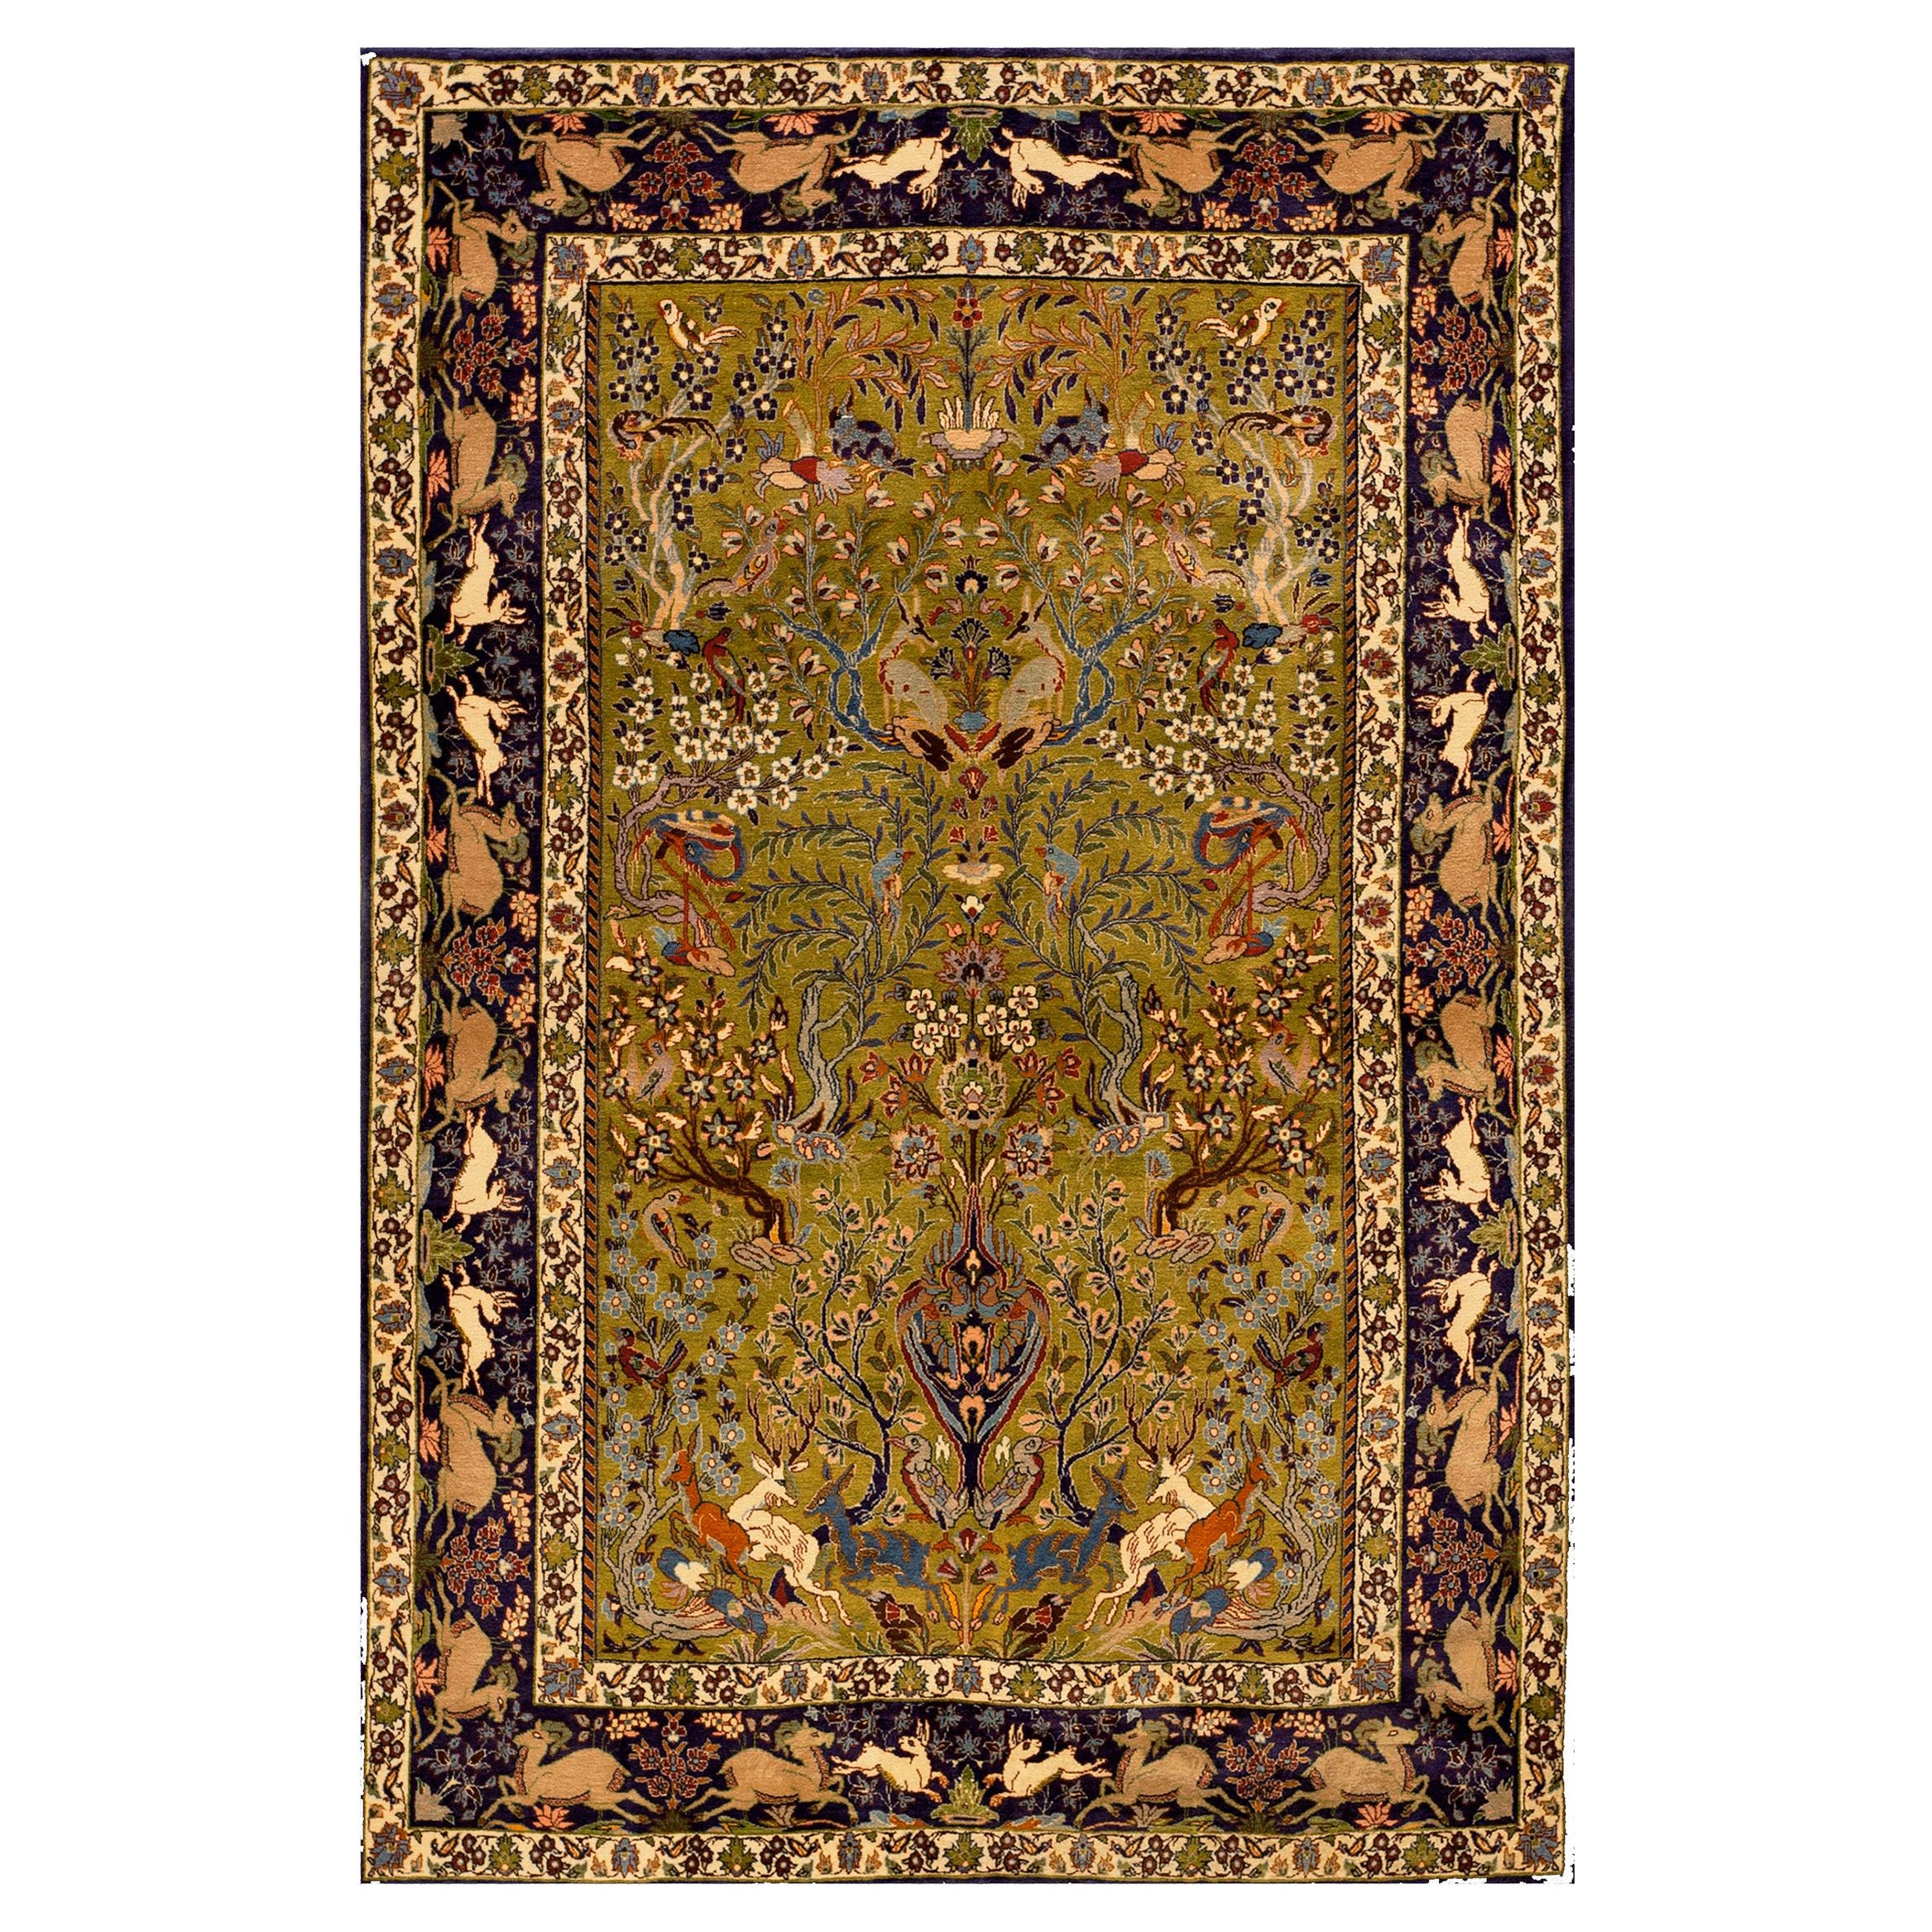 Mid 20th Century Persian Isfahan Carpet ( 3' 6'' x 5' 4'' - 107 x 163 cm) For Sale